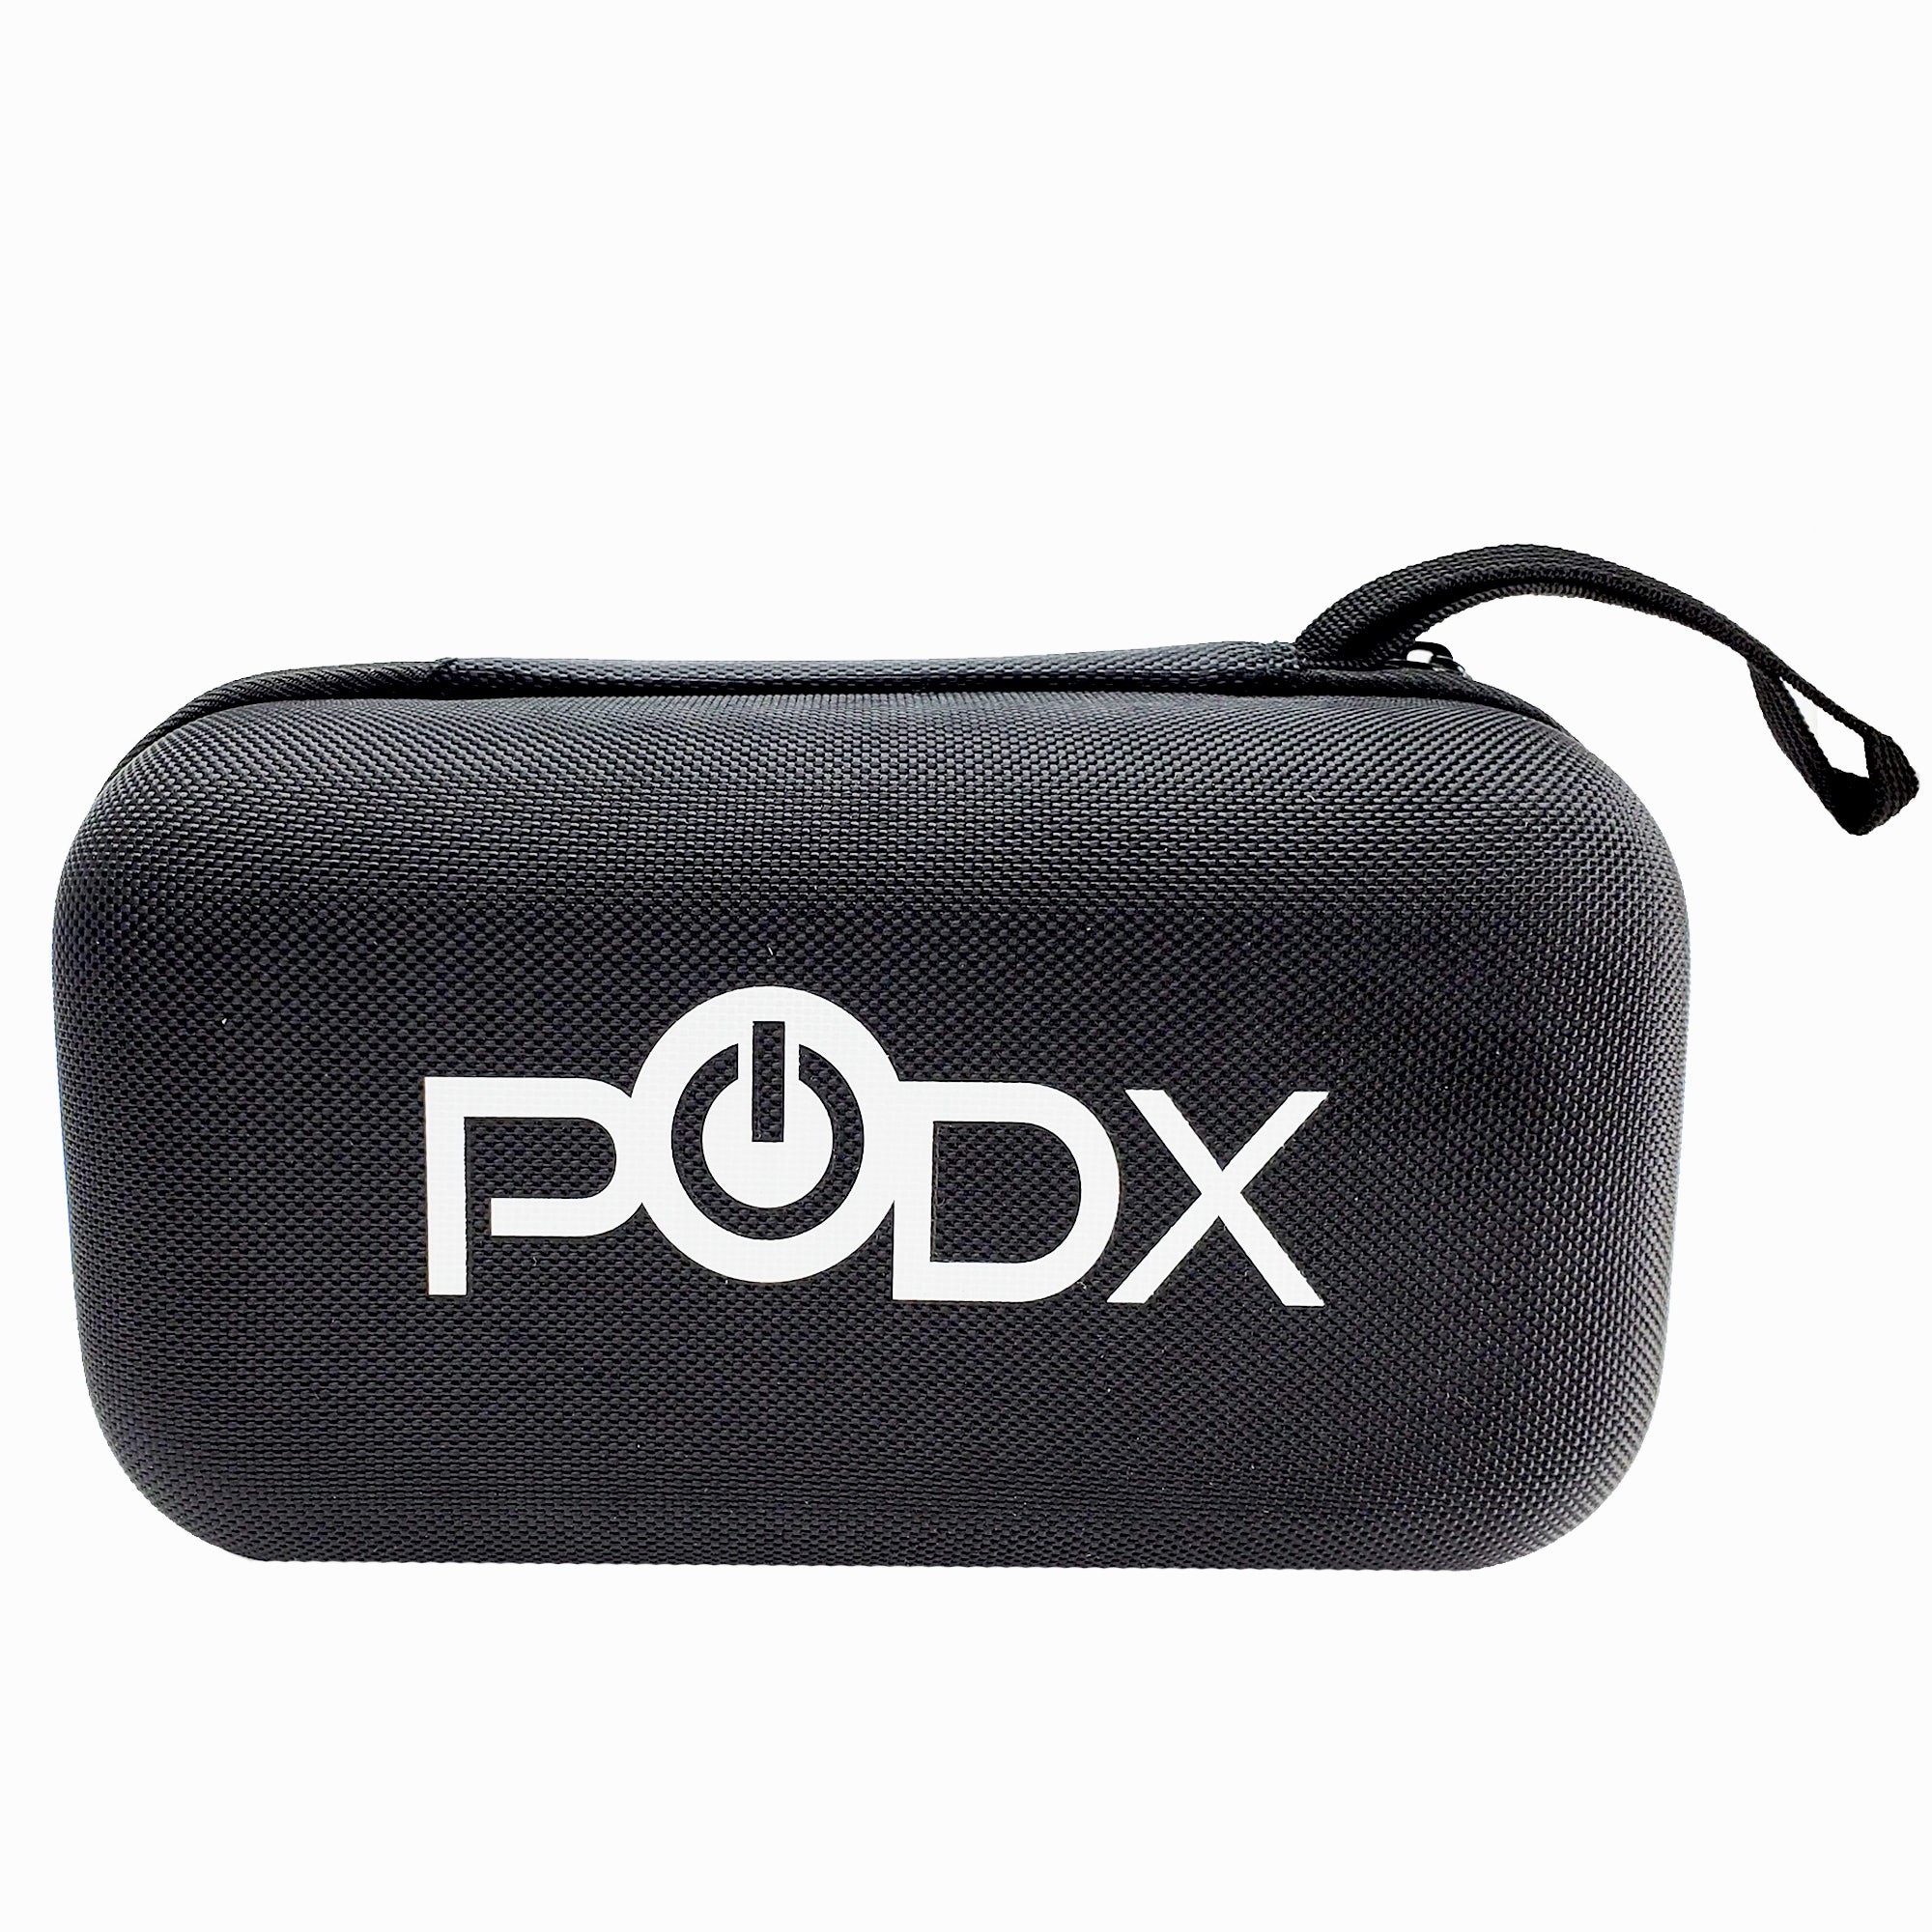 POD-XTREME |  Industrial-Grade Automotive (12V) Jump-Starter for Gas or Diesel Engines  | +Personal PowerPack